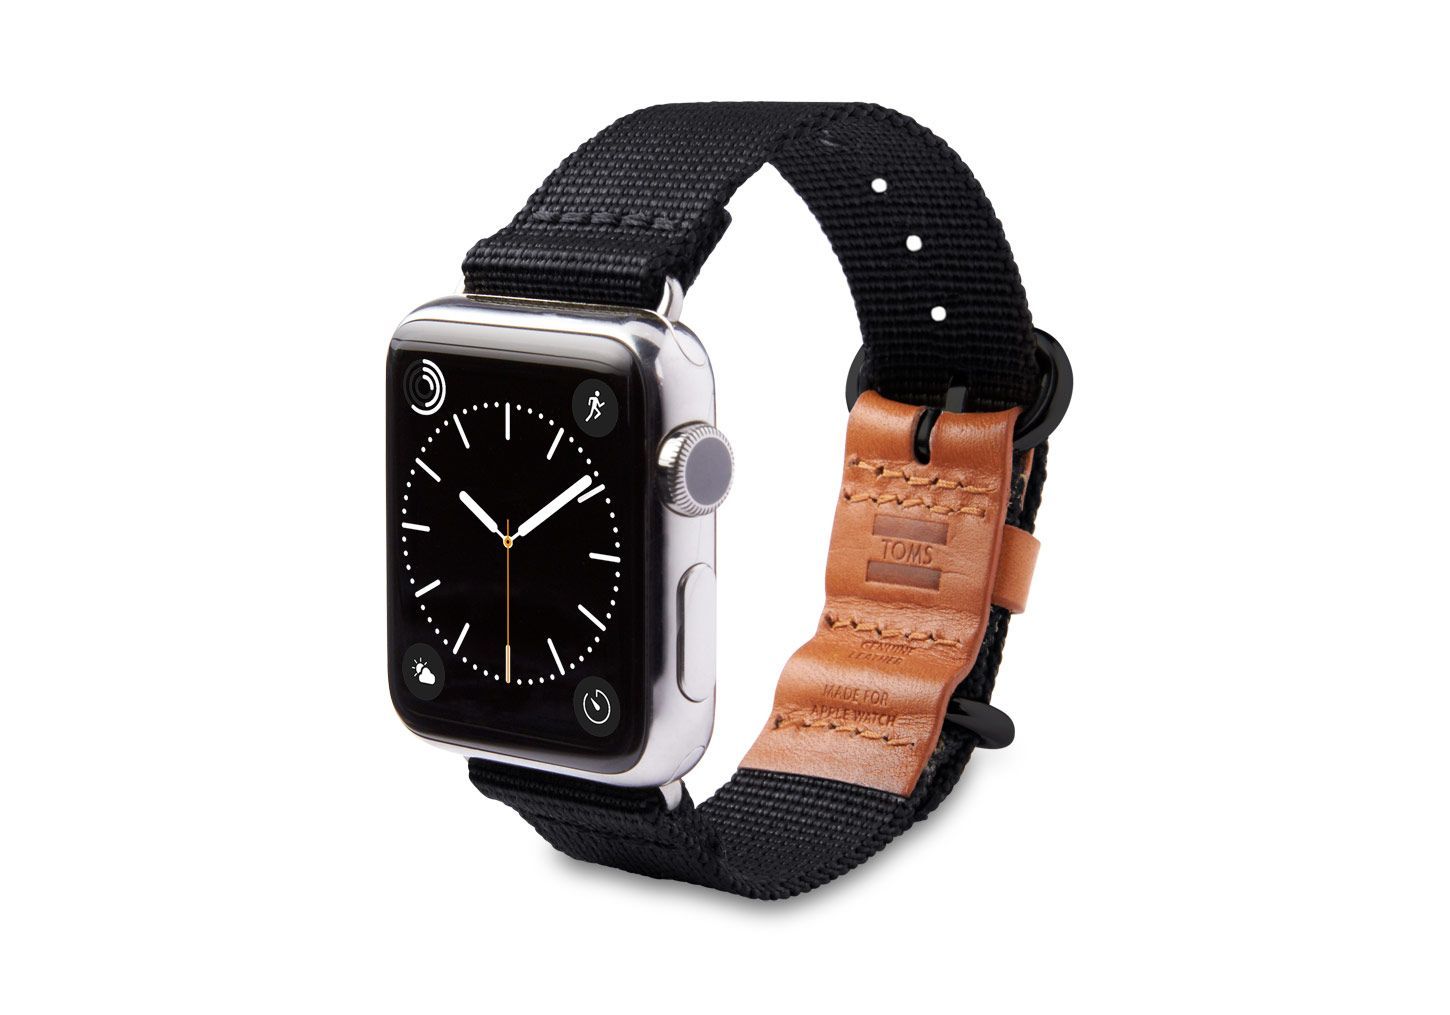 toms the hip shoemaker now makes apple watch bands for charity image 1